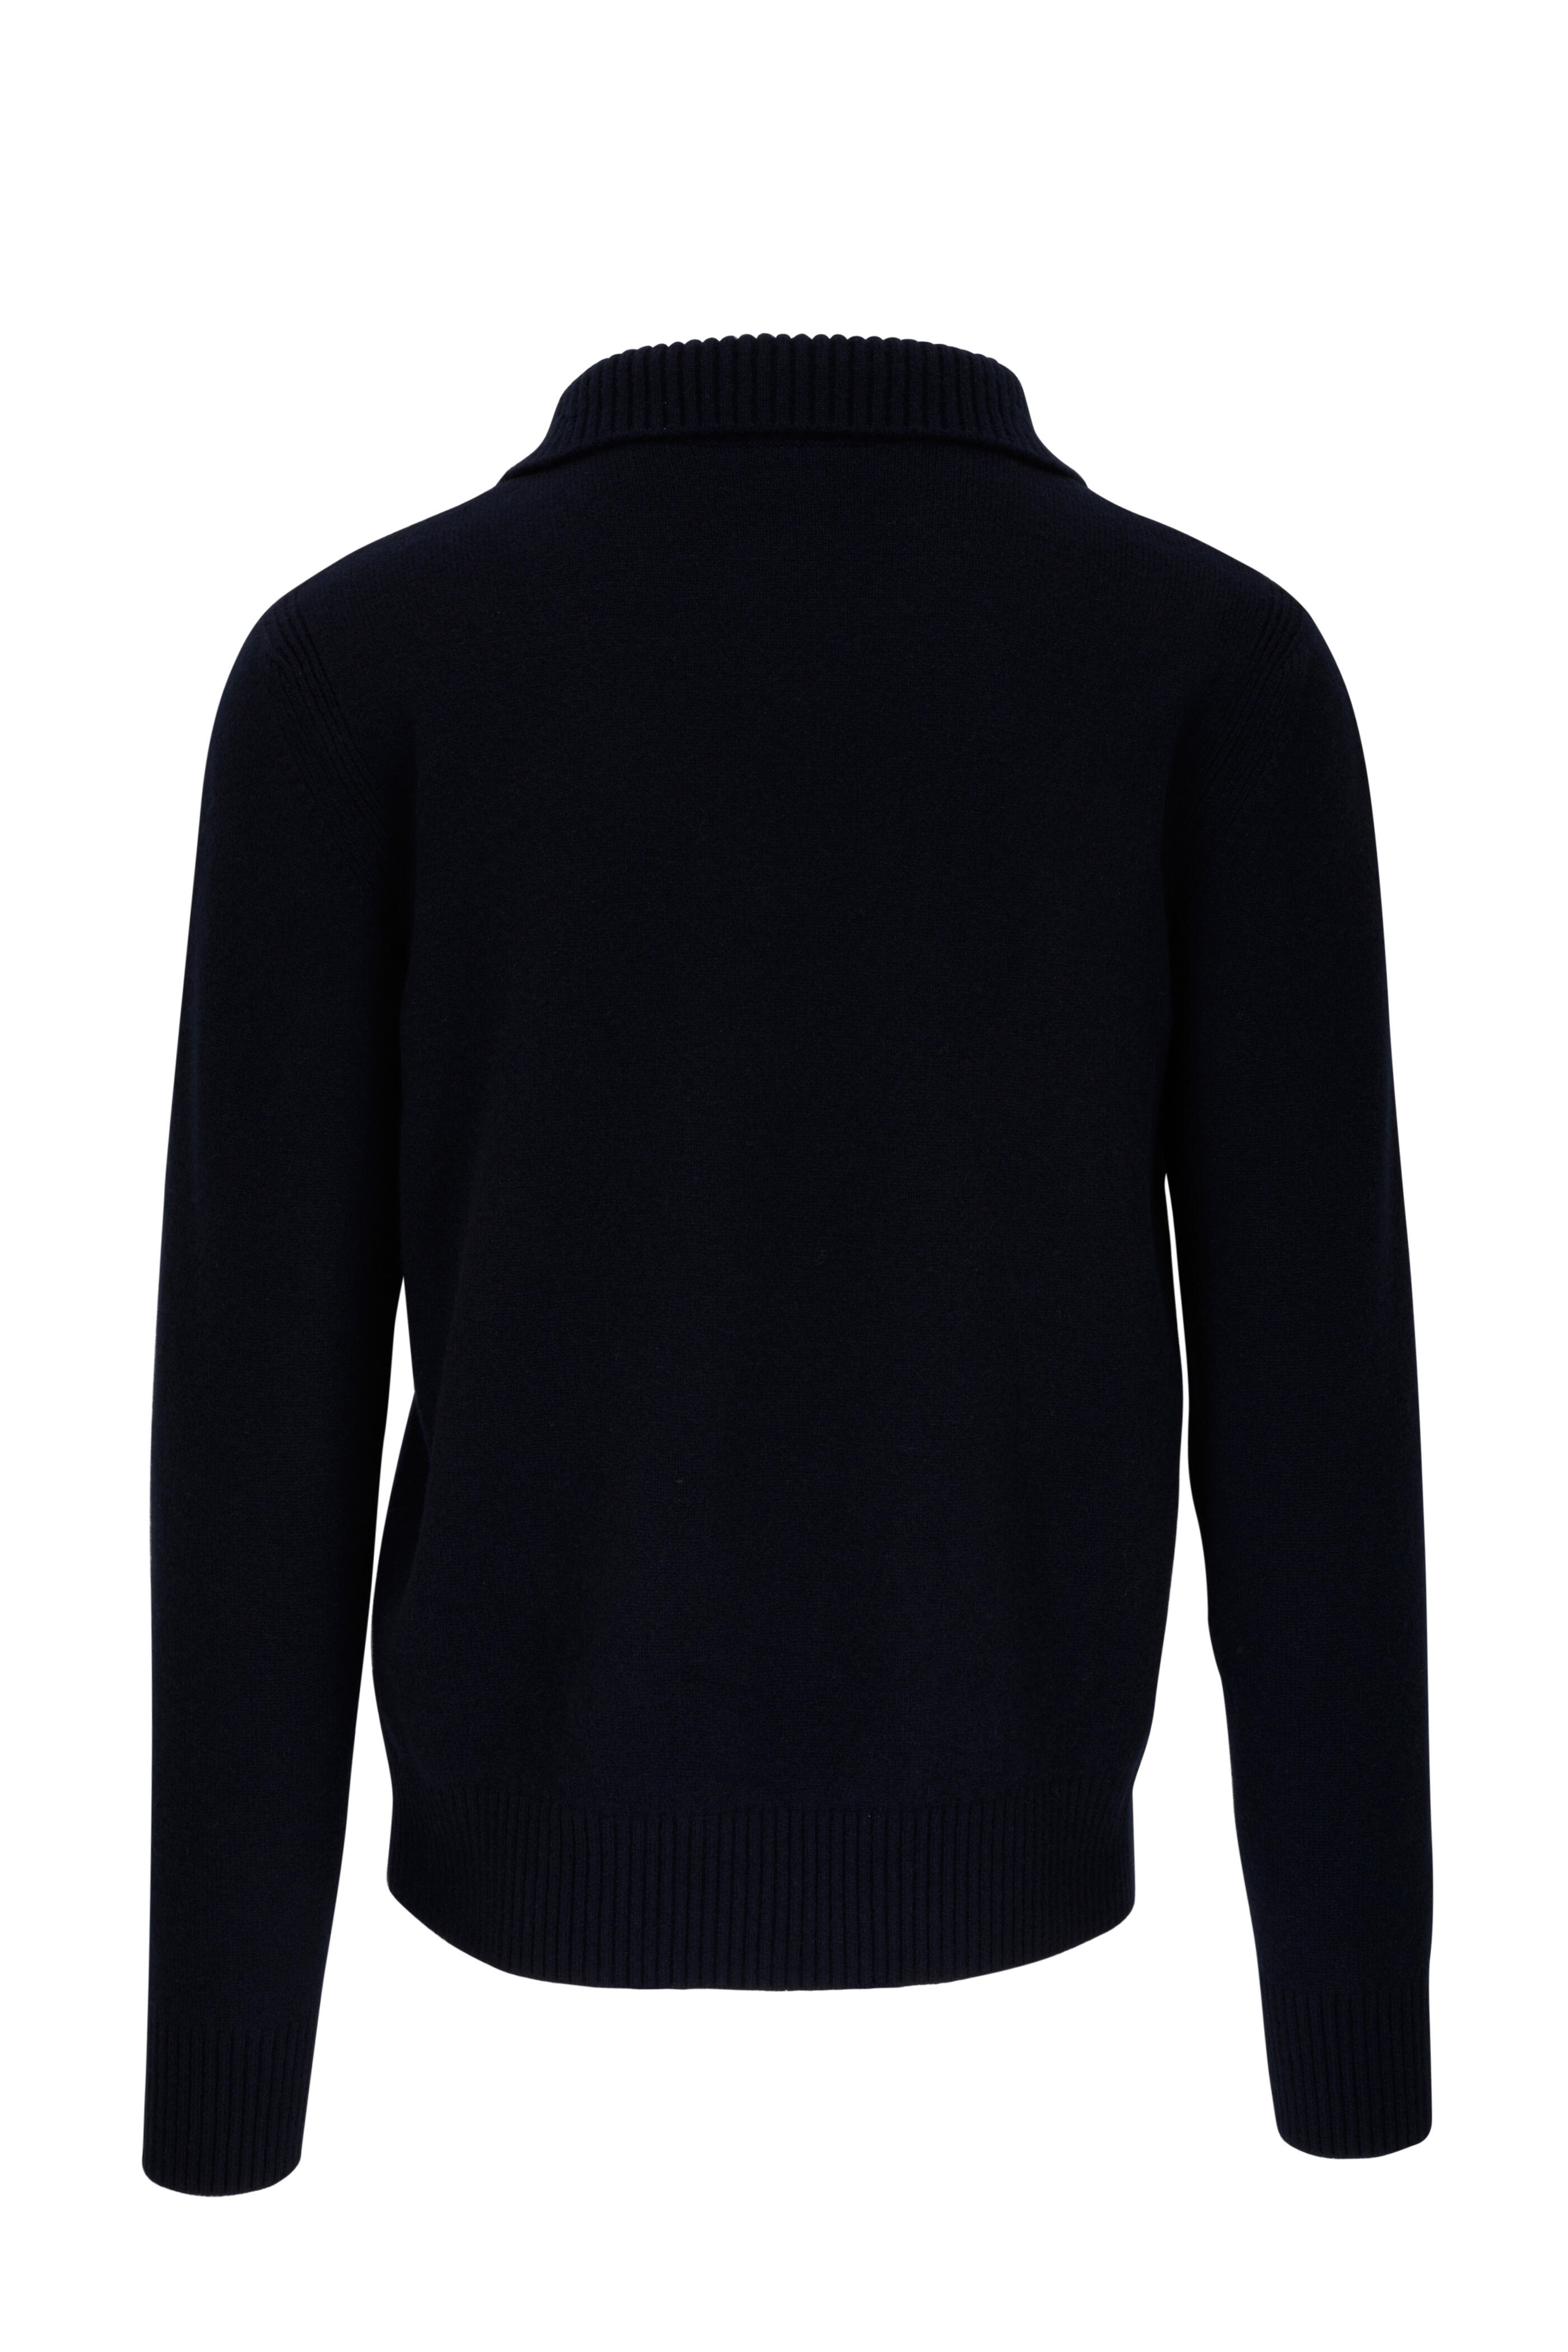 Tom Ford - Navy Wool Blend Quarter Zip Pullover | Mitchell Stores